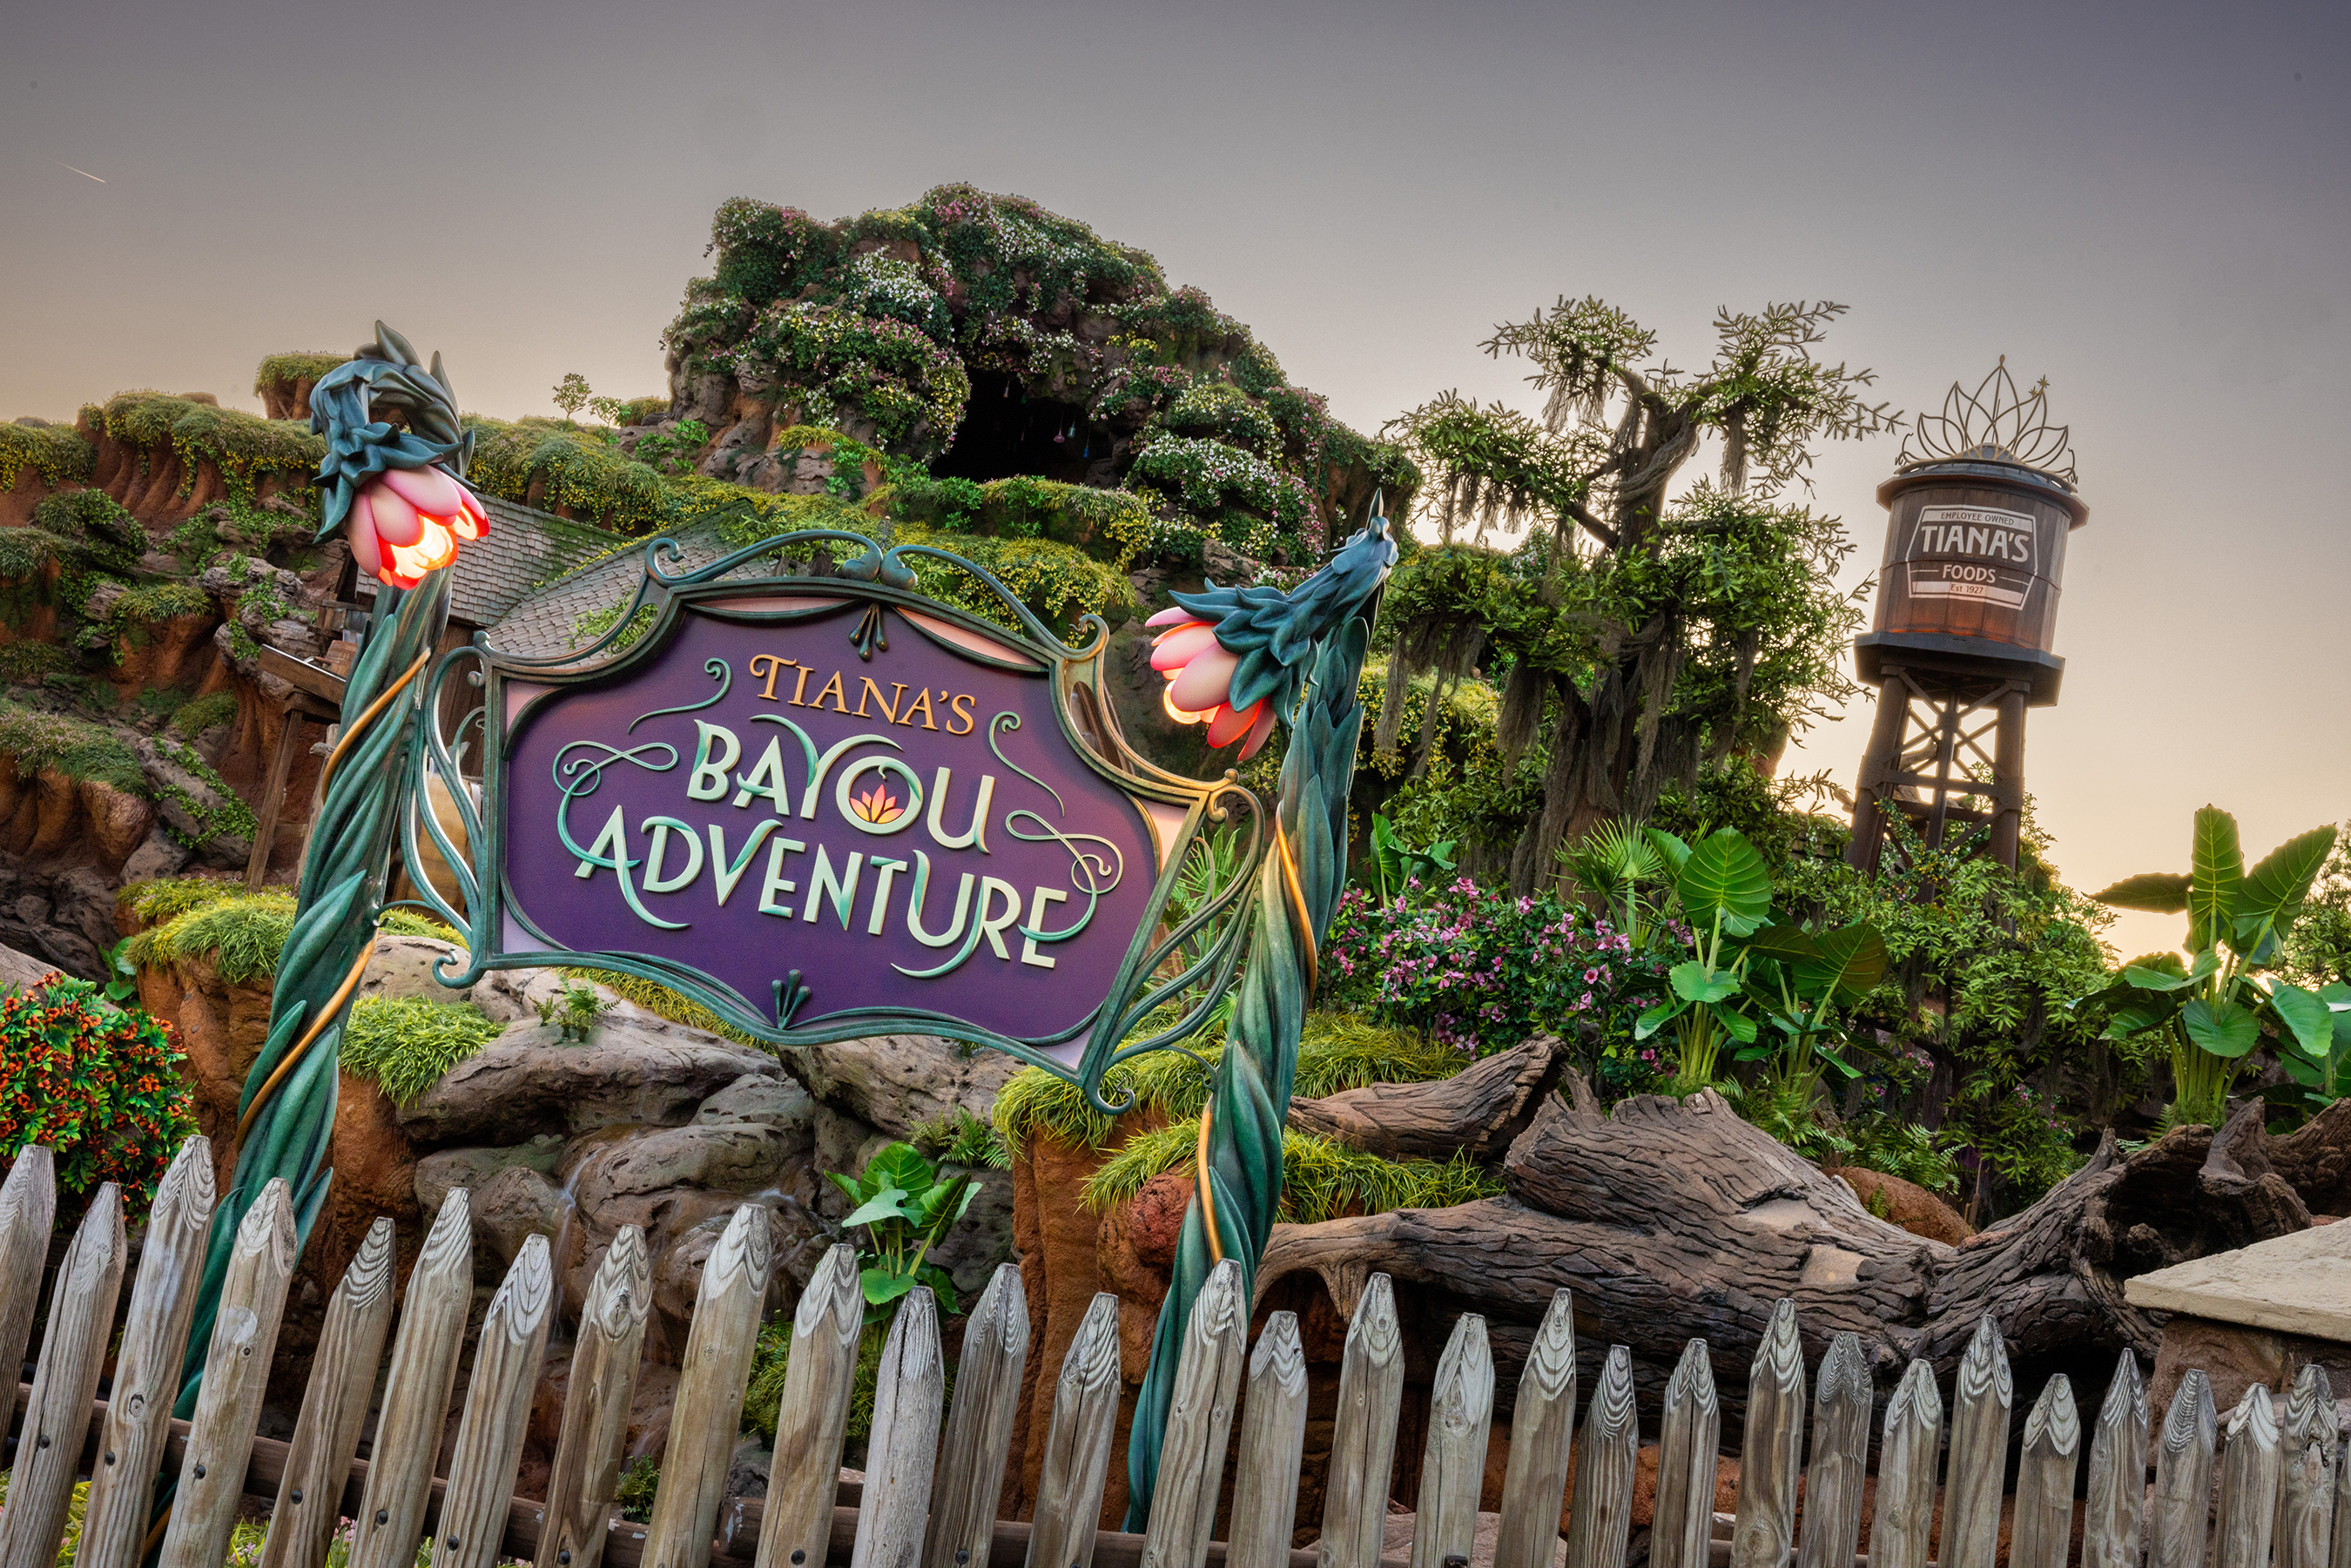 Tiana&#x27;s Bayou Adventure sign in front of a lush, green landscape with trees, flowers, and a water tower in the background